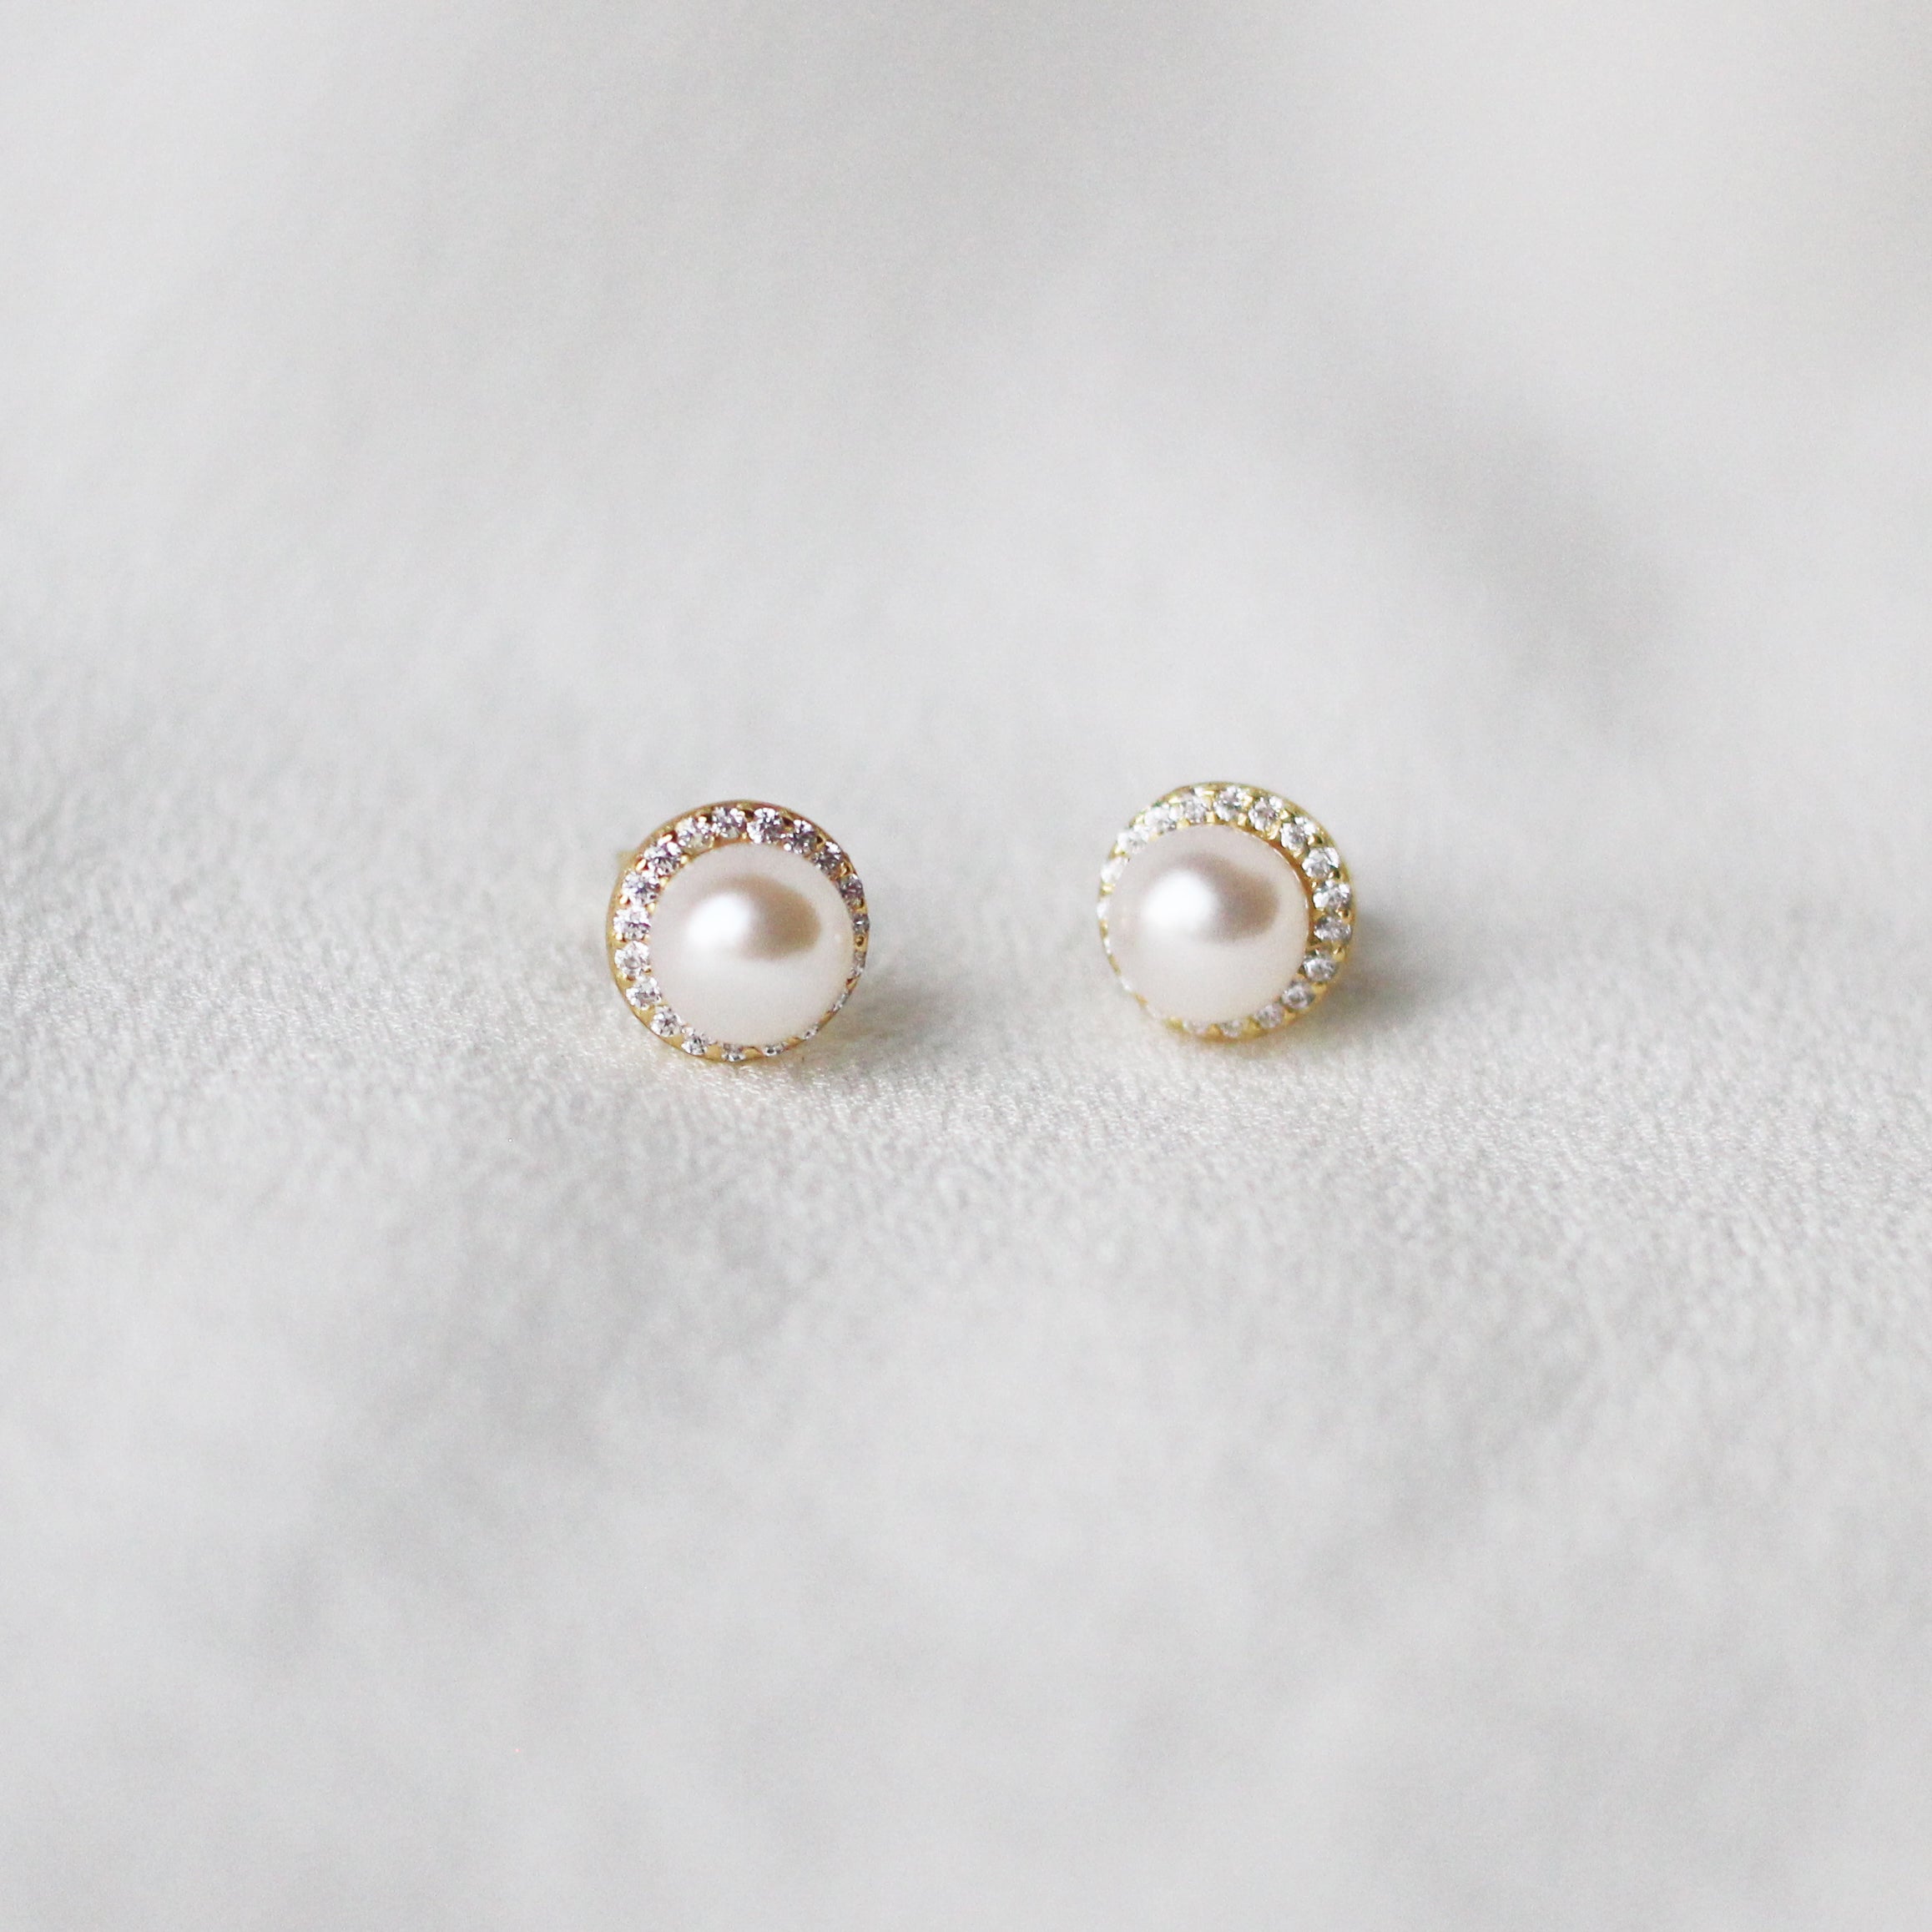 22K Gold Earrings for Women with Pearls - 235-GER12244 in 4.200 Grams